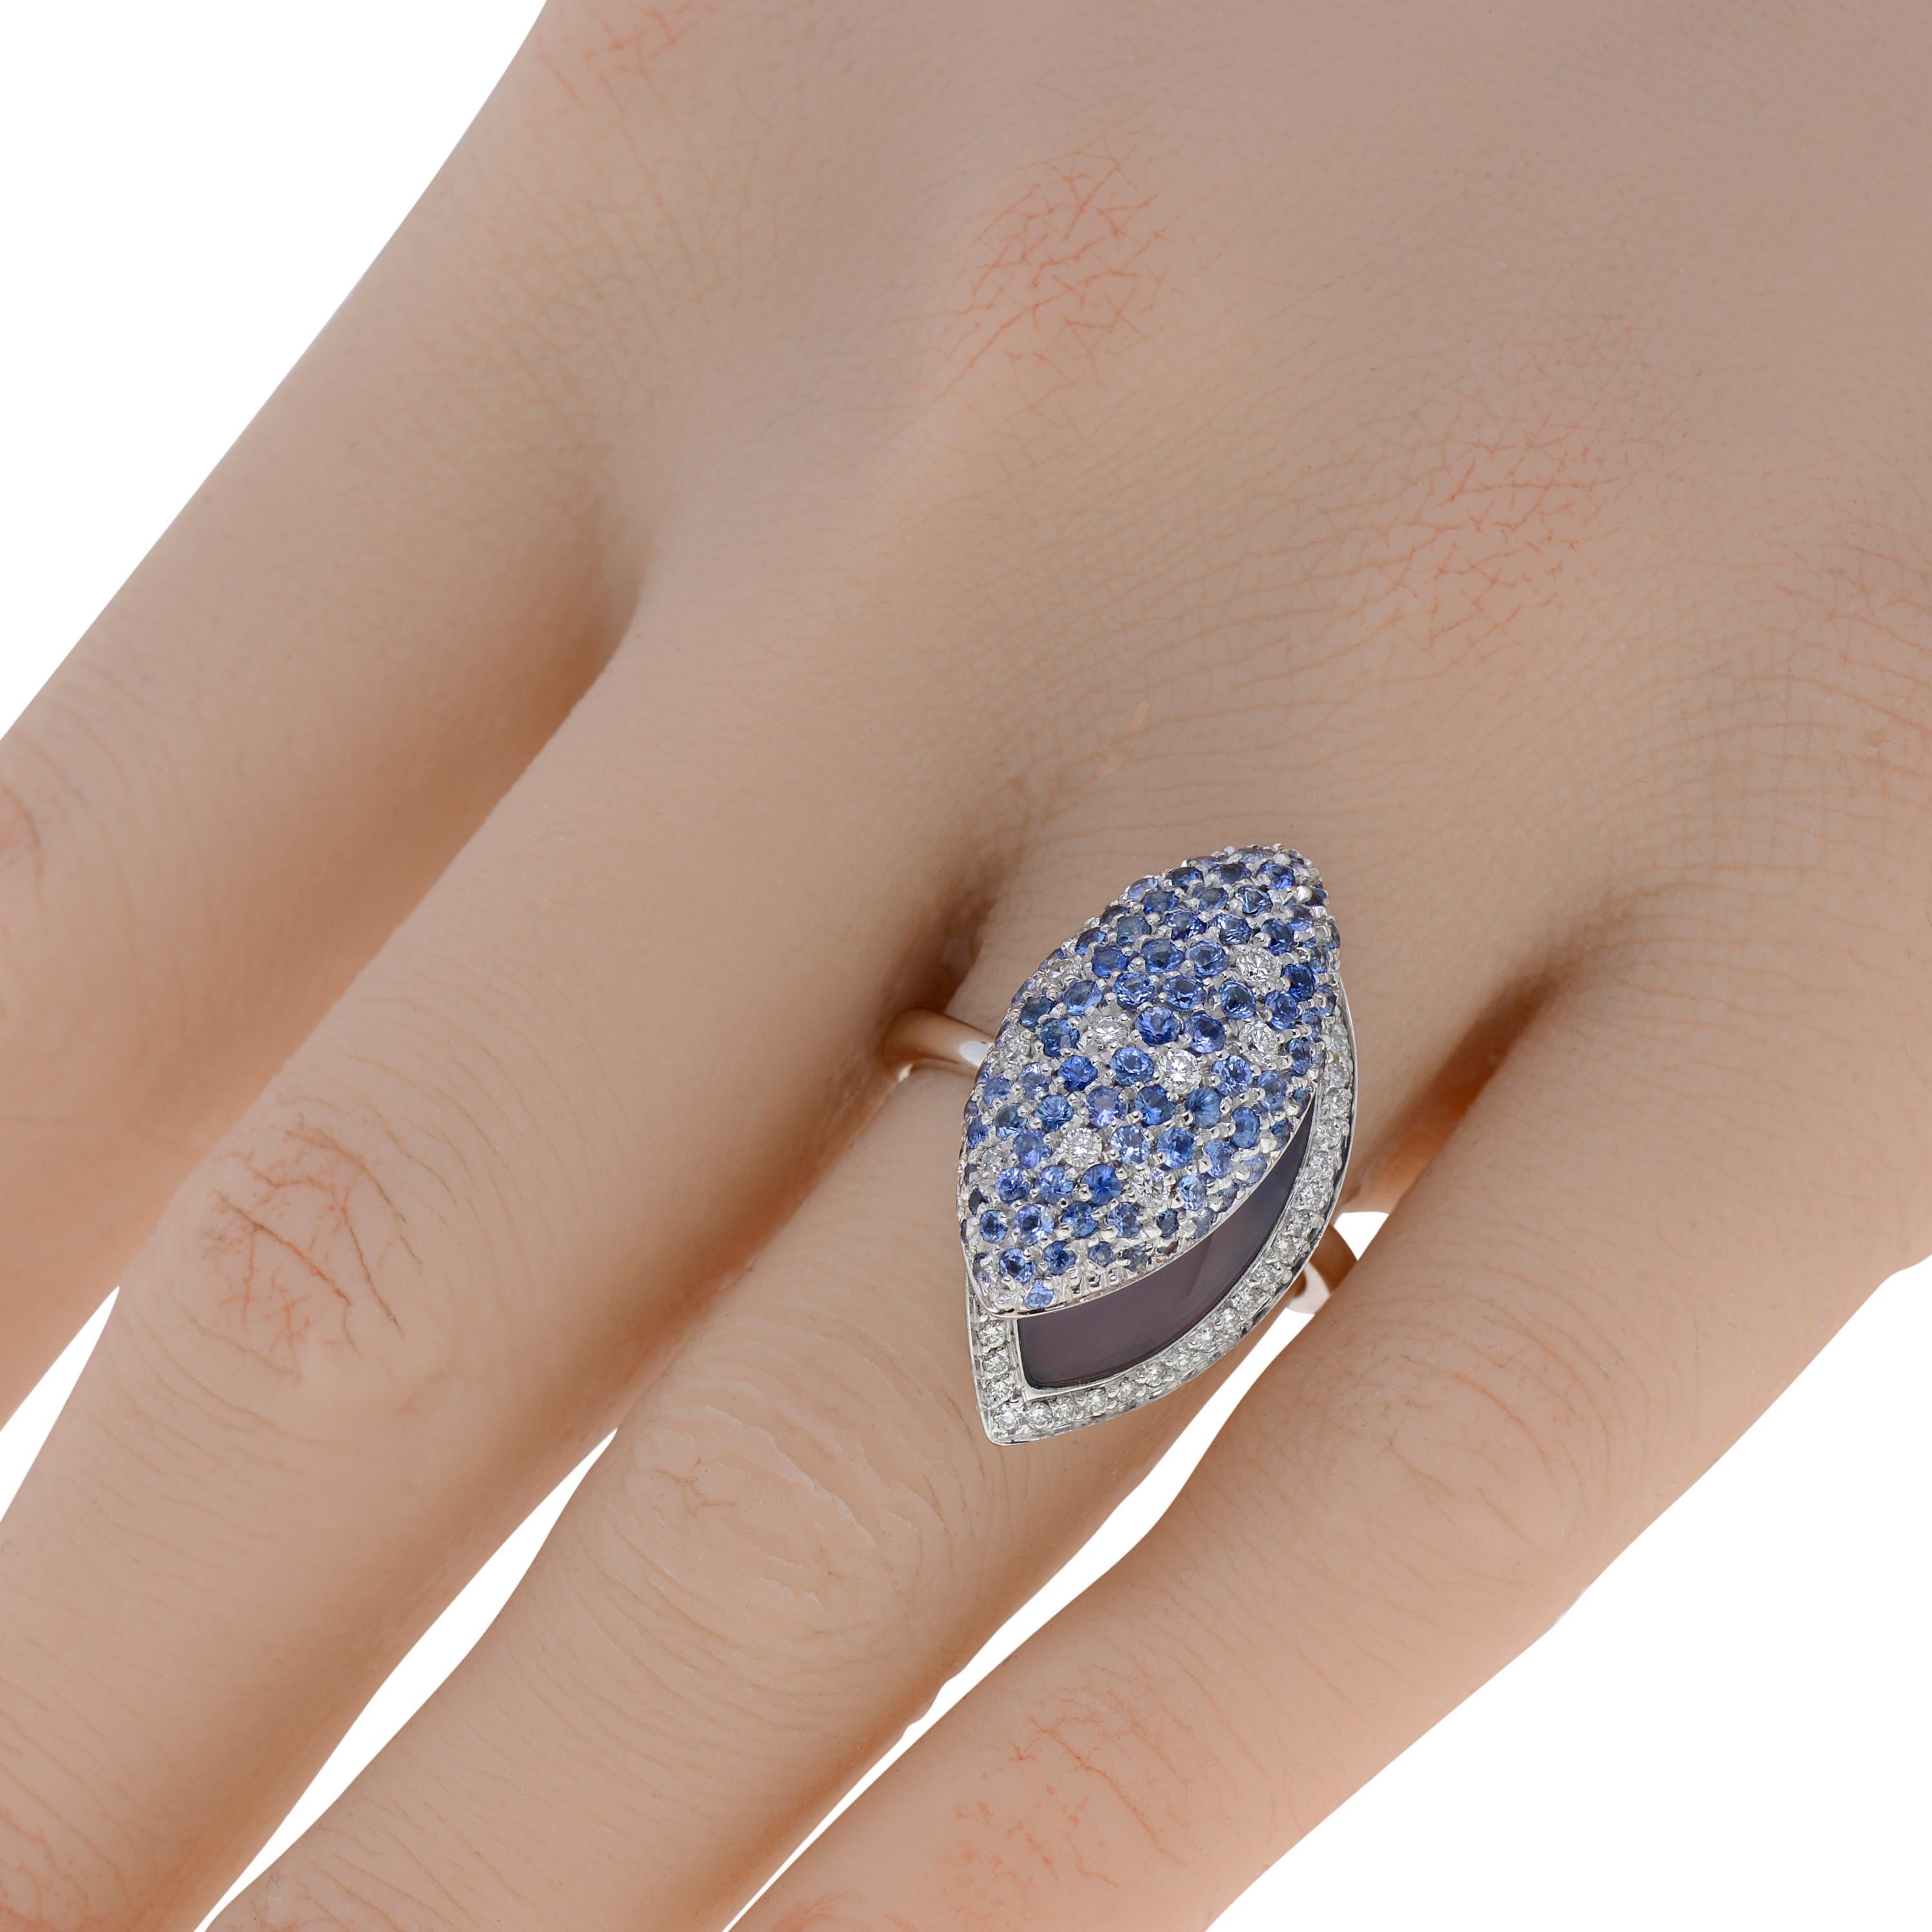 This glamorous Zydo 18K White Gold Band Ring features 1.46ct. tw. sapphire and 0.33ct. tw. pave diamonds accents over a 3.90ct. tw. center stone. The ring size is 6.75 (53.8). The decoration size is 5/8